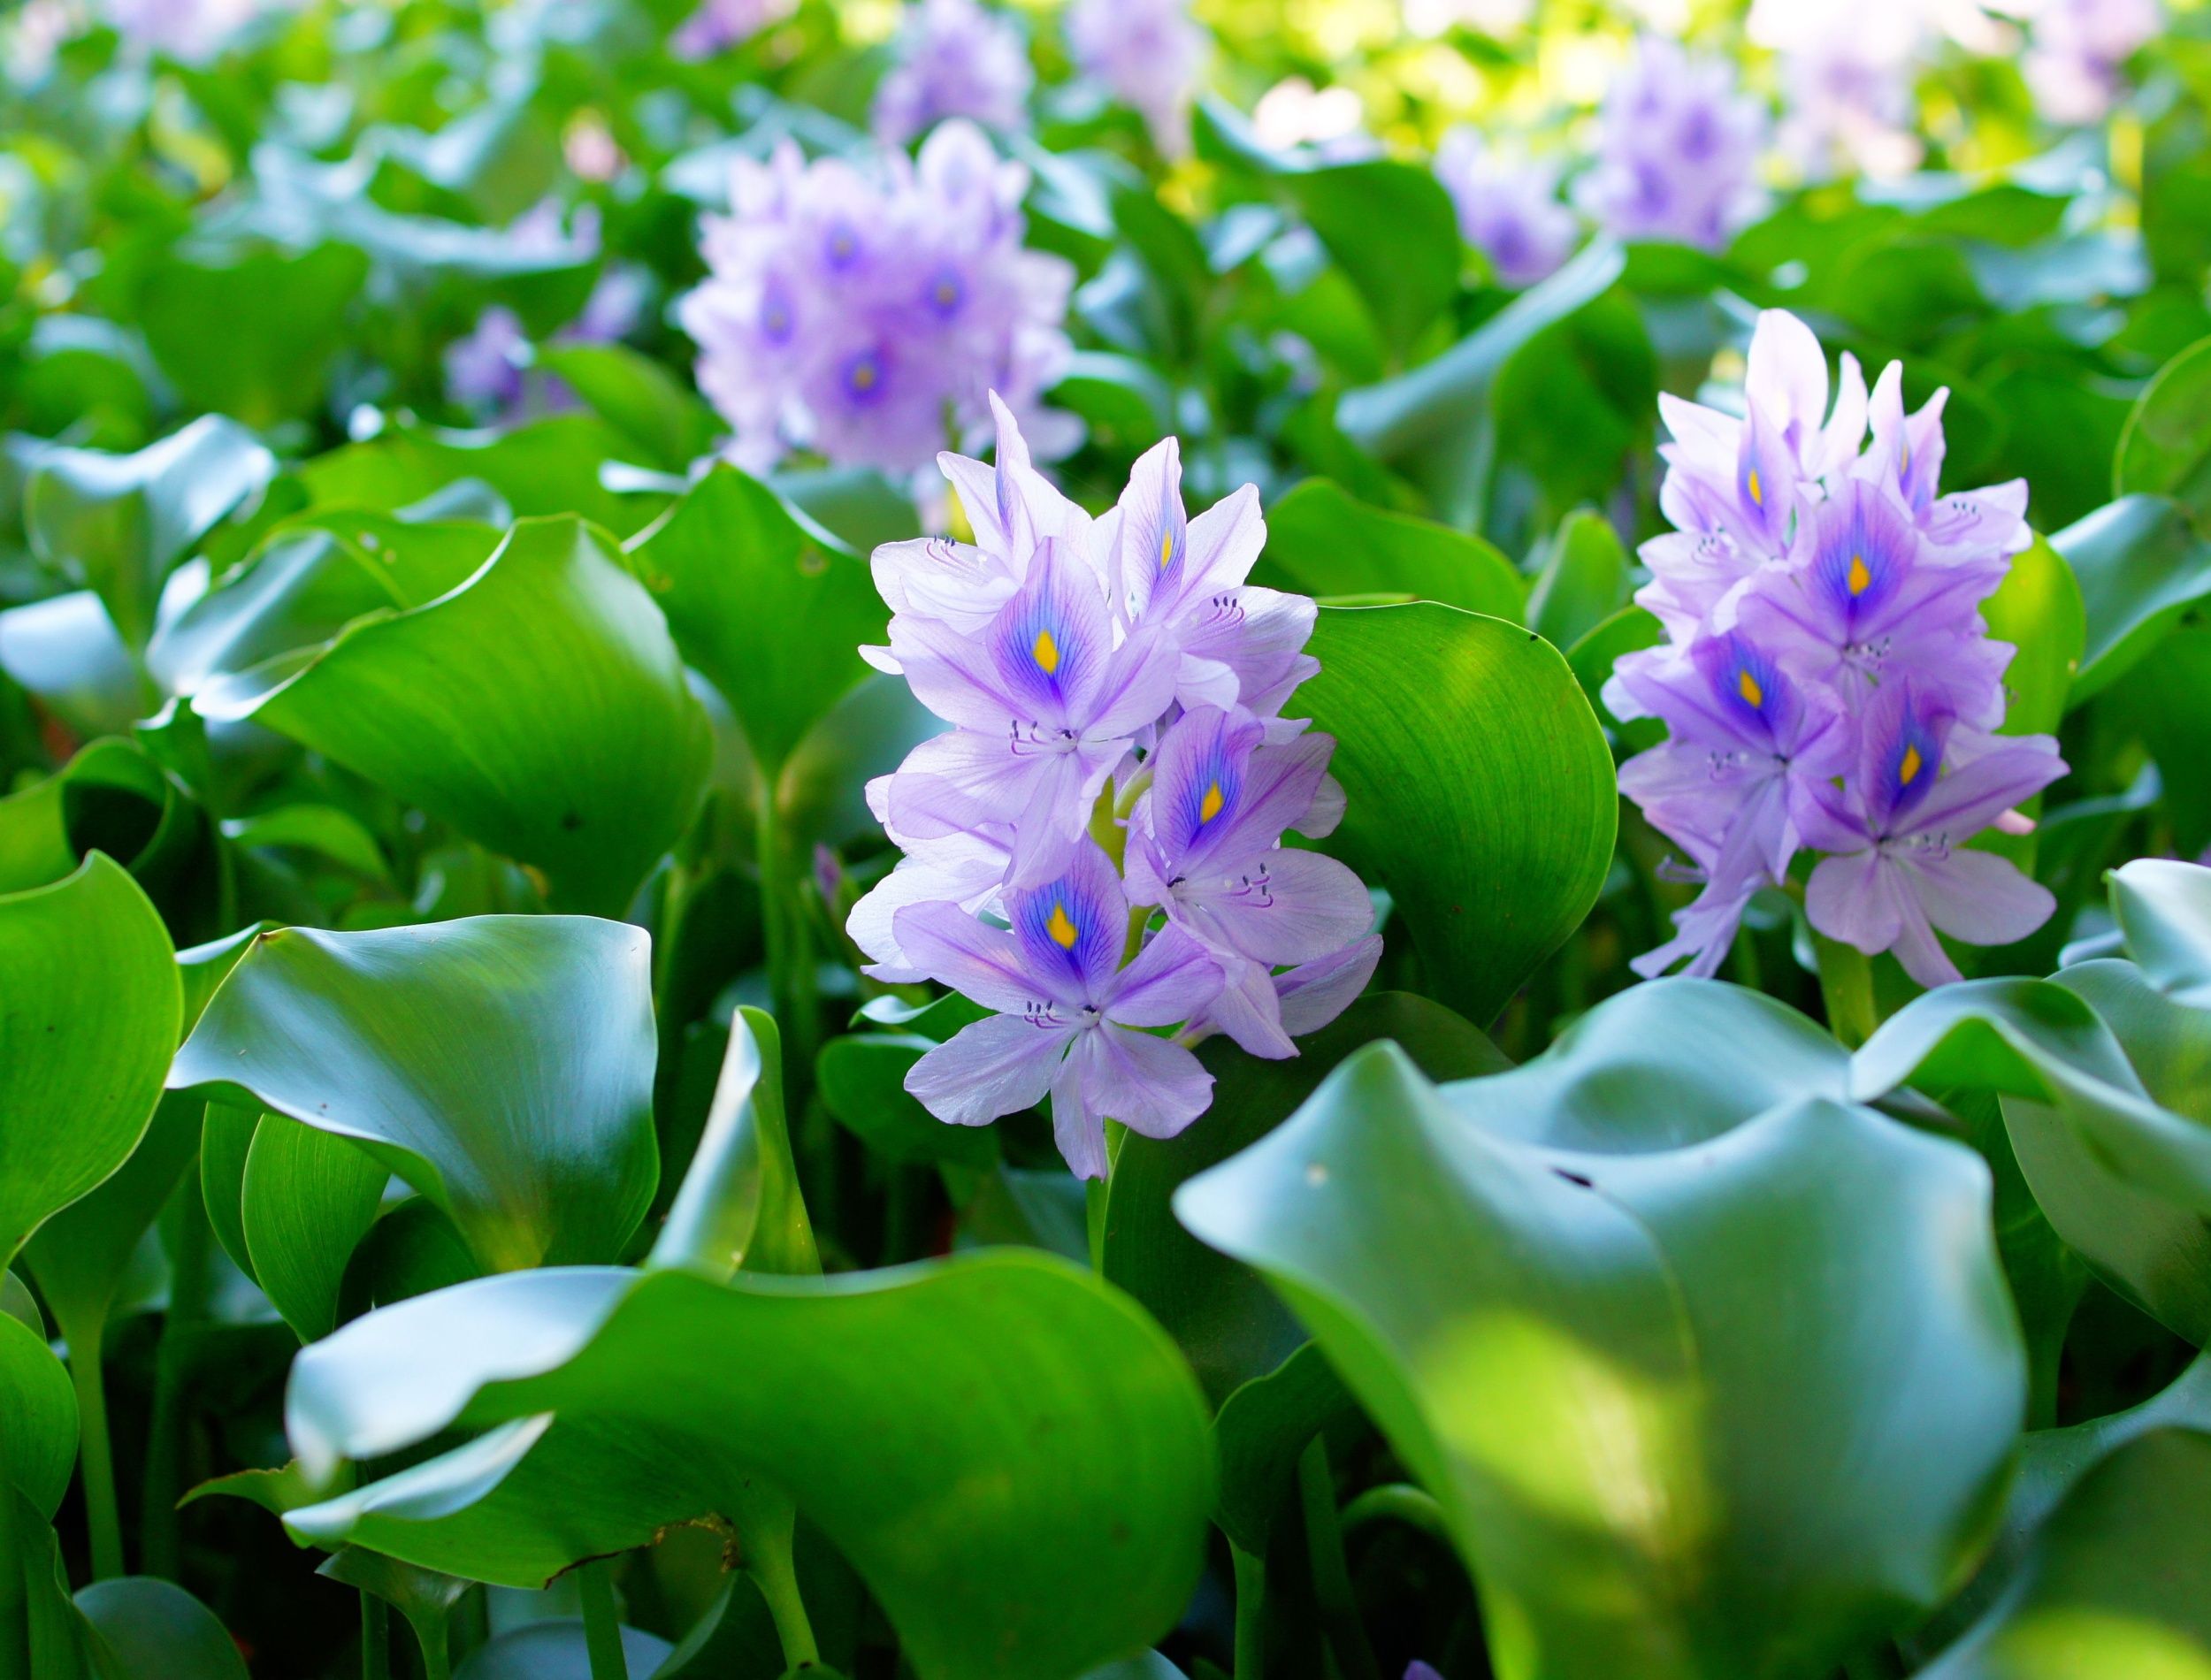 Water hyacinth blooms surrounded by greenery